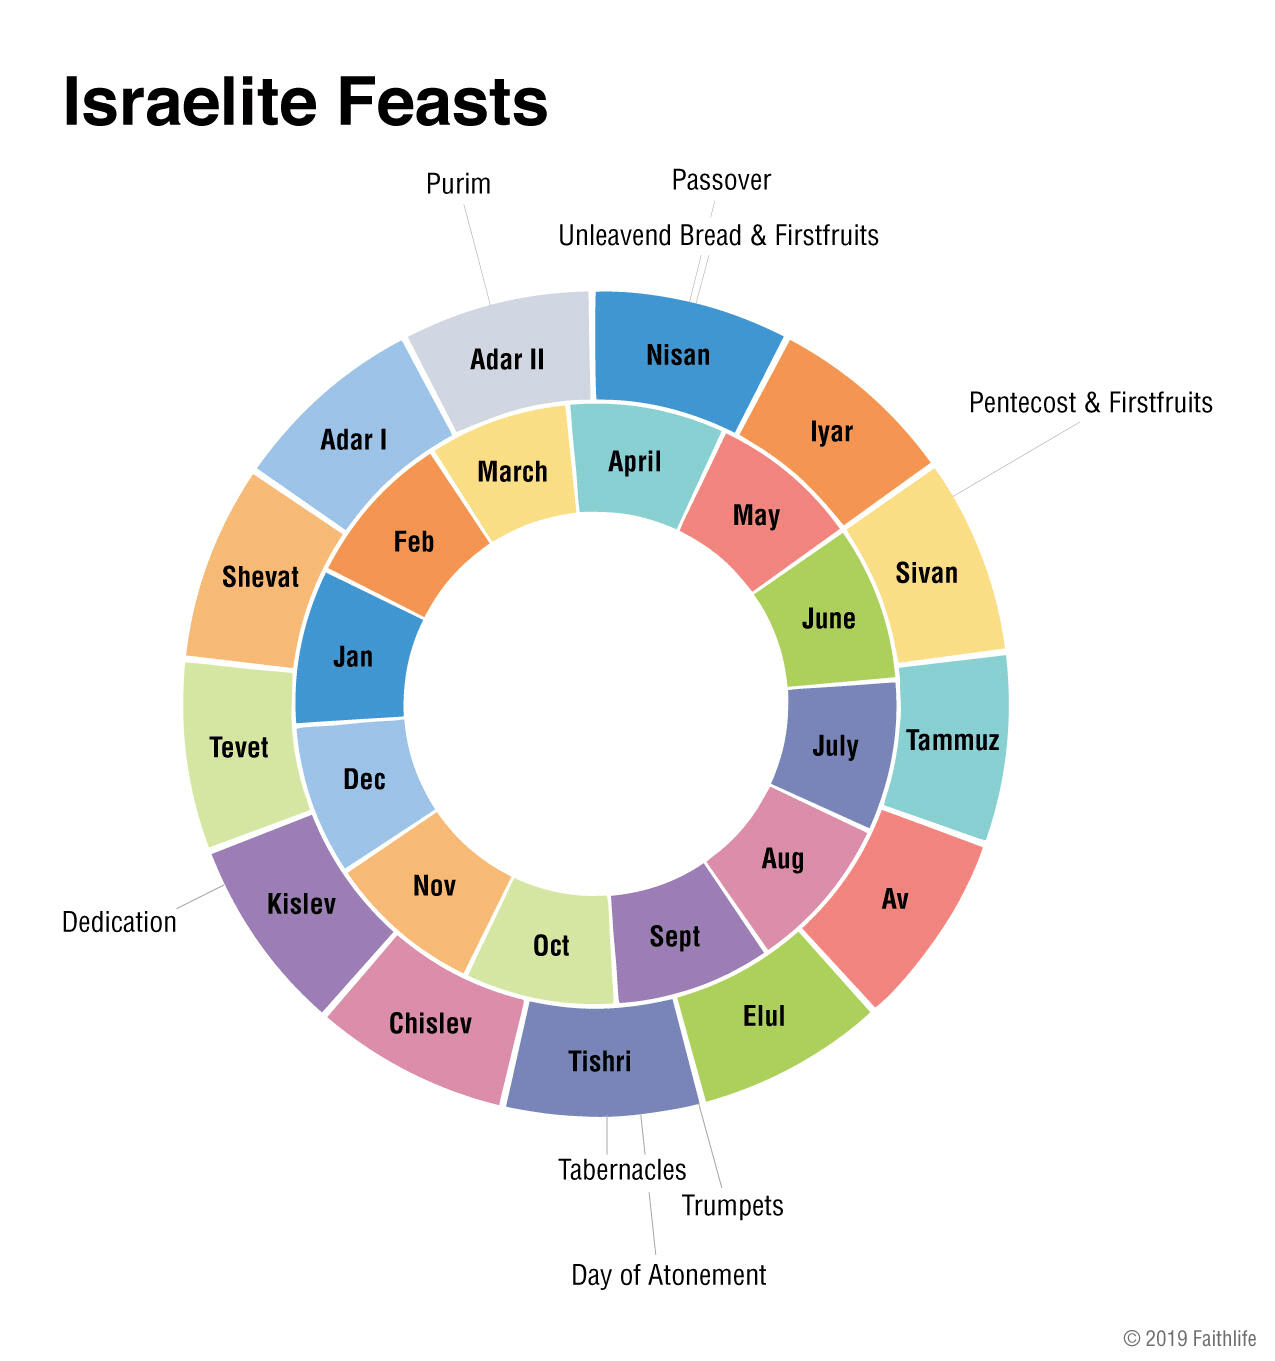 colorful chart displays Israelite feasts in the Bible, including Pentecost & Firstfruits in the Old Testament